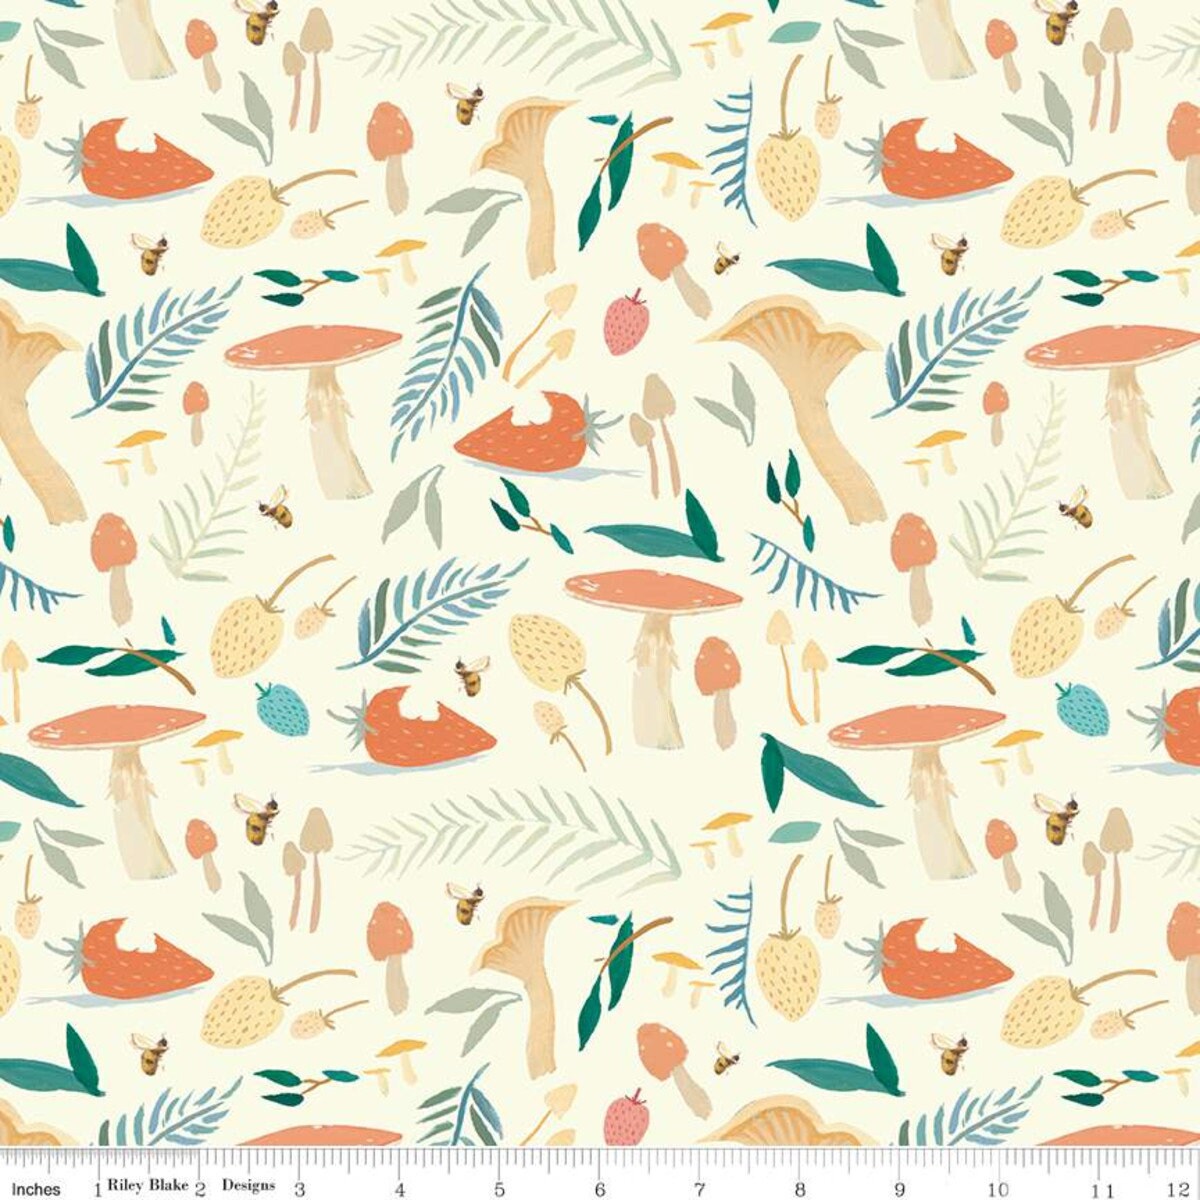 Toadstools Cream by Emily Winfield Martin for Riley Blake Designs Dream World Line